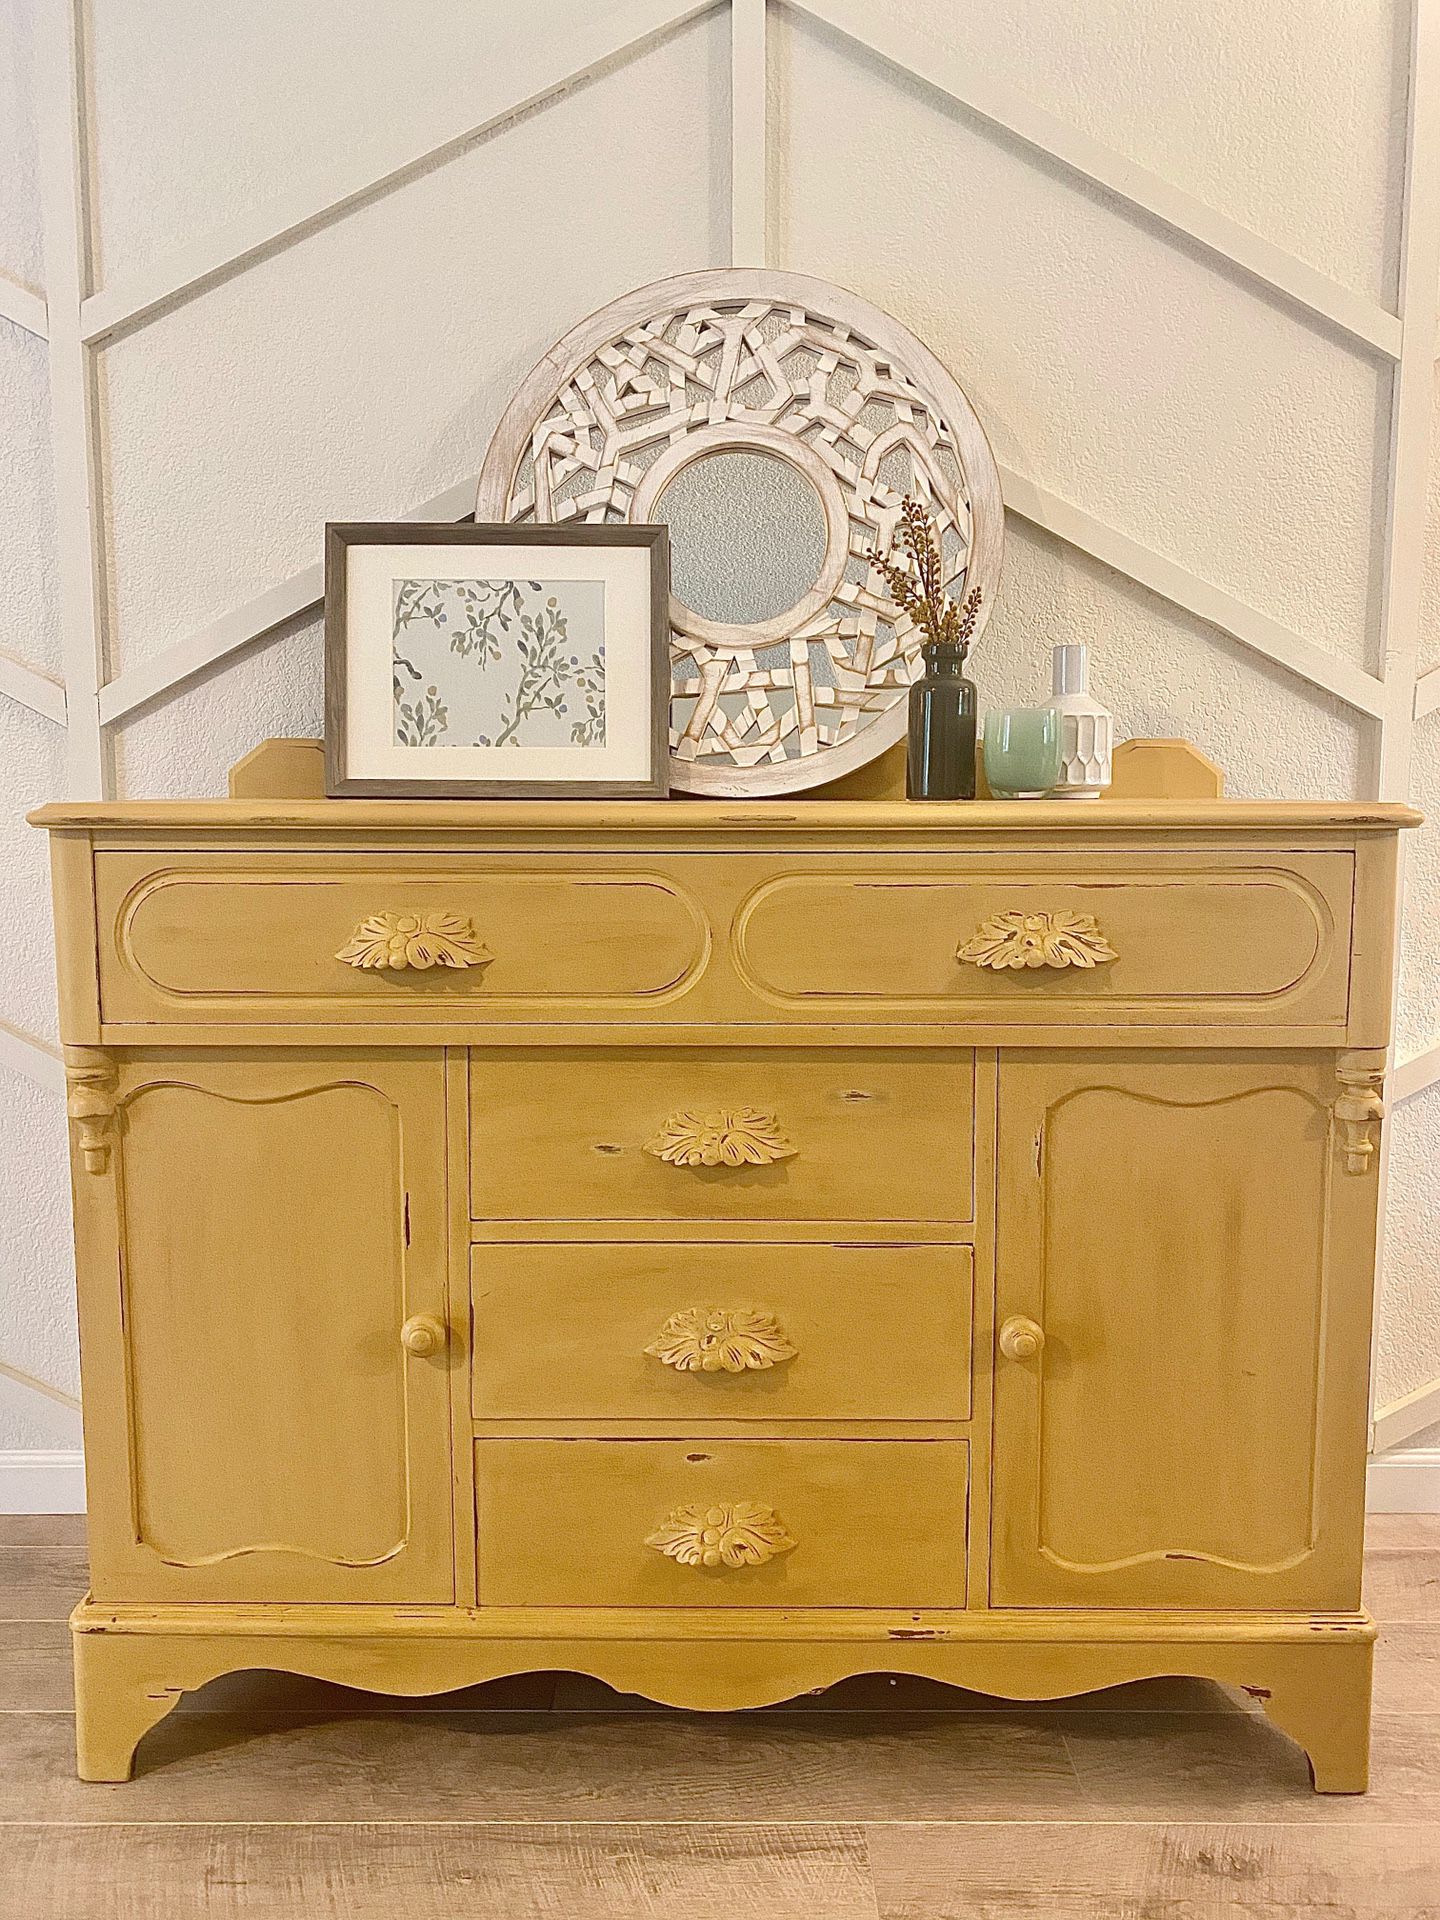 Antique refinished mustard yellow cabinet